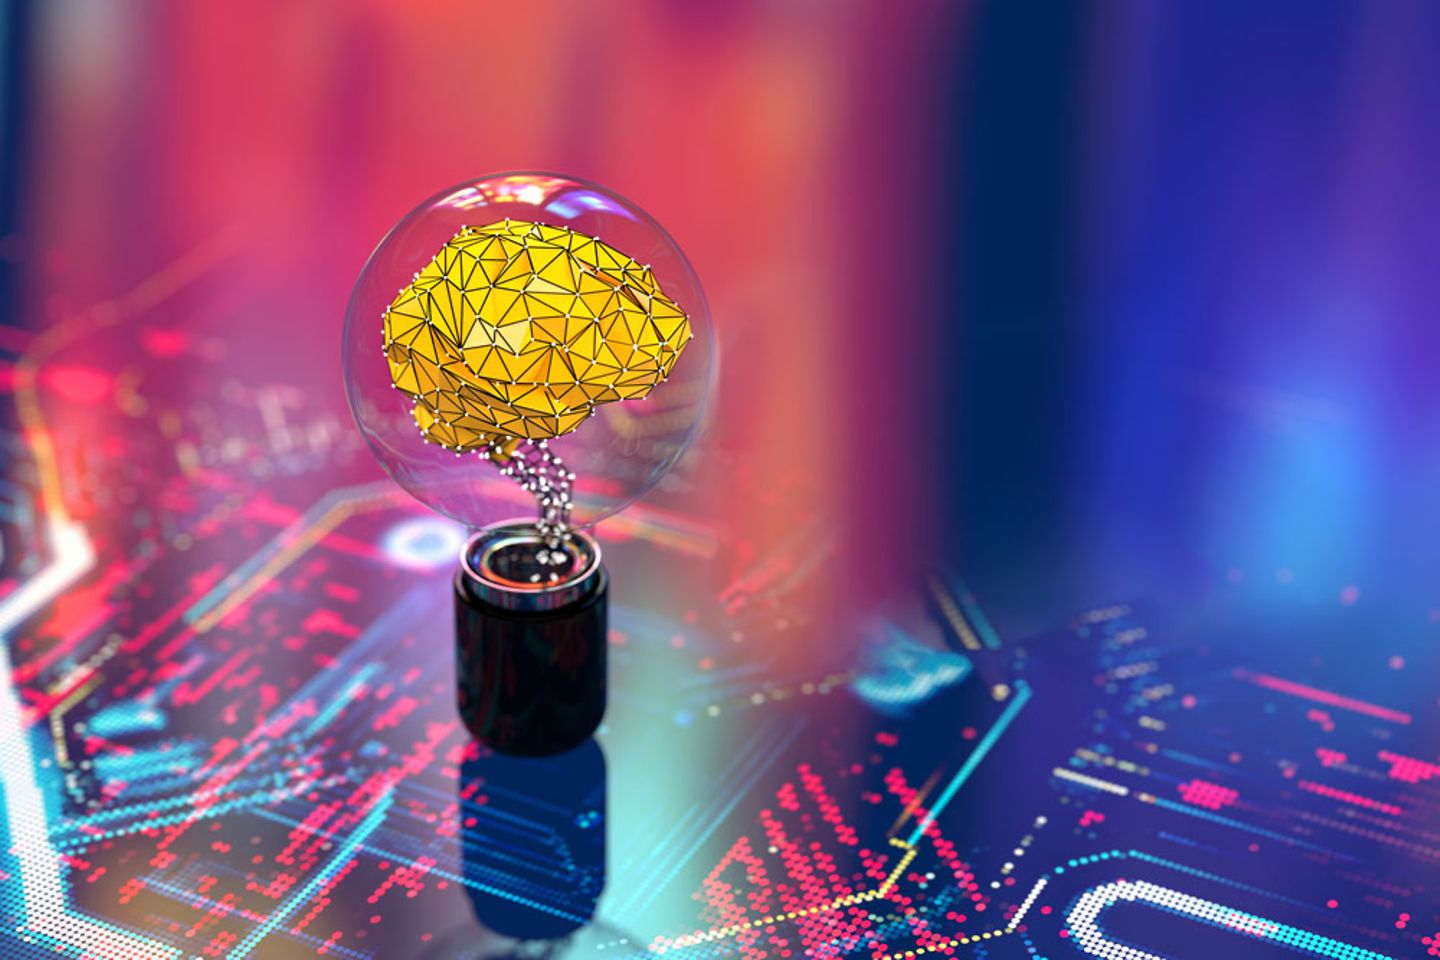 A brain made of polygons in a light bulb on a colorful circuit board